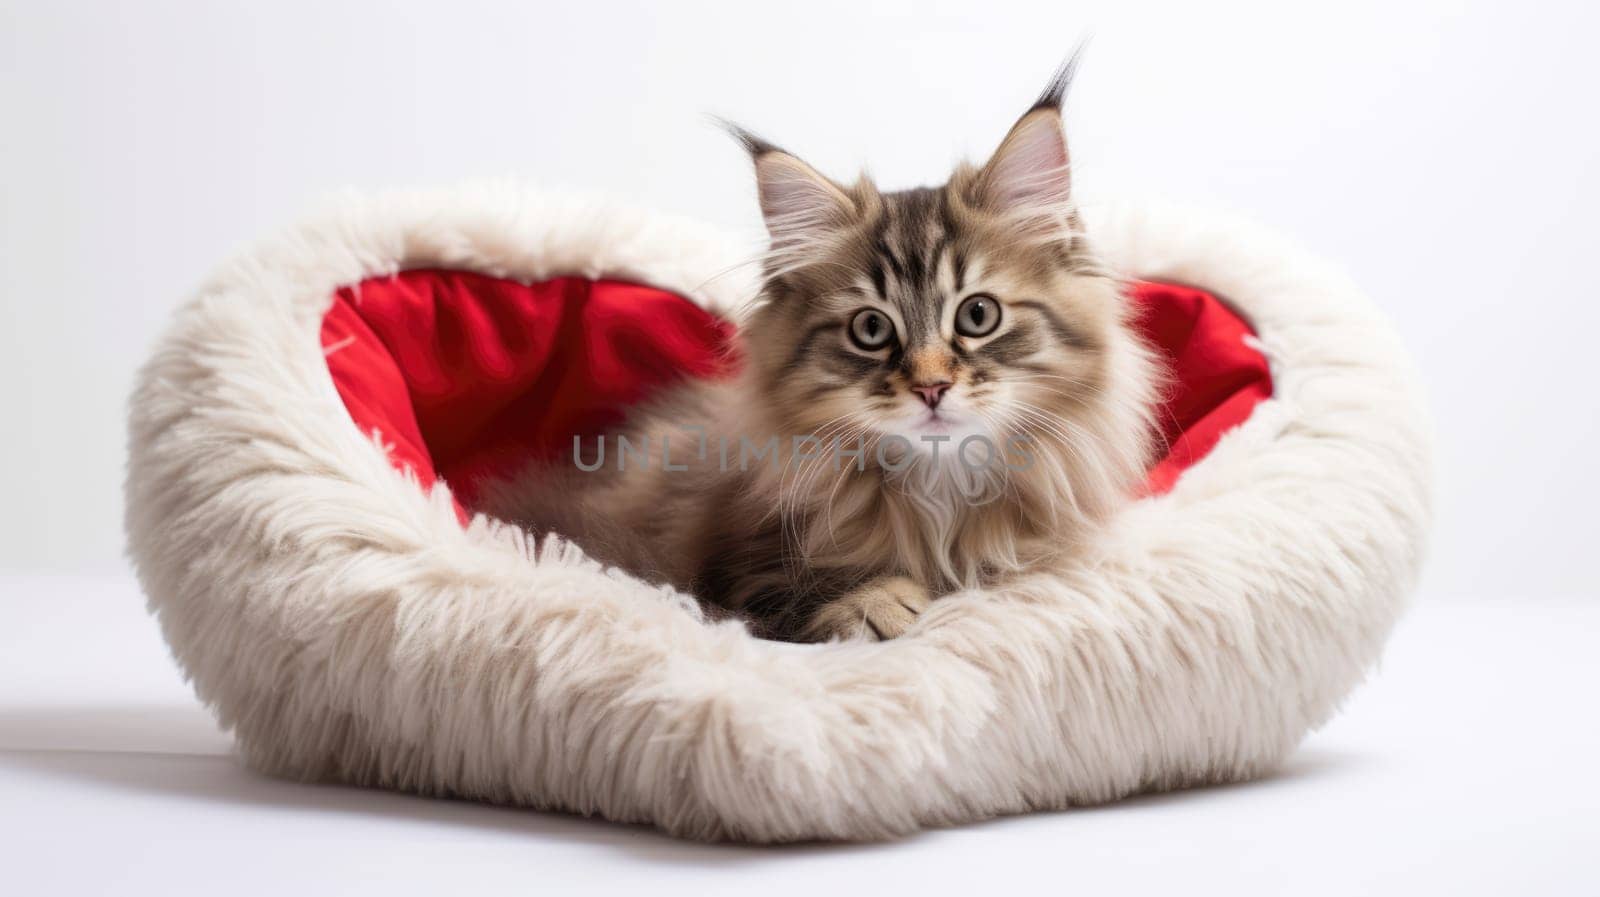 Valentines Day kitten. Small striped kitten playing with red heart on pink looking at camera. Adorable domestic kitty pets concept by JuliaDorian